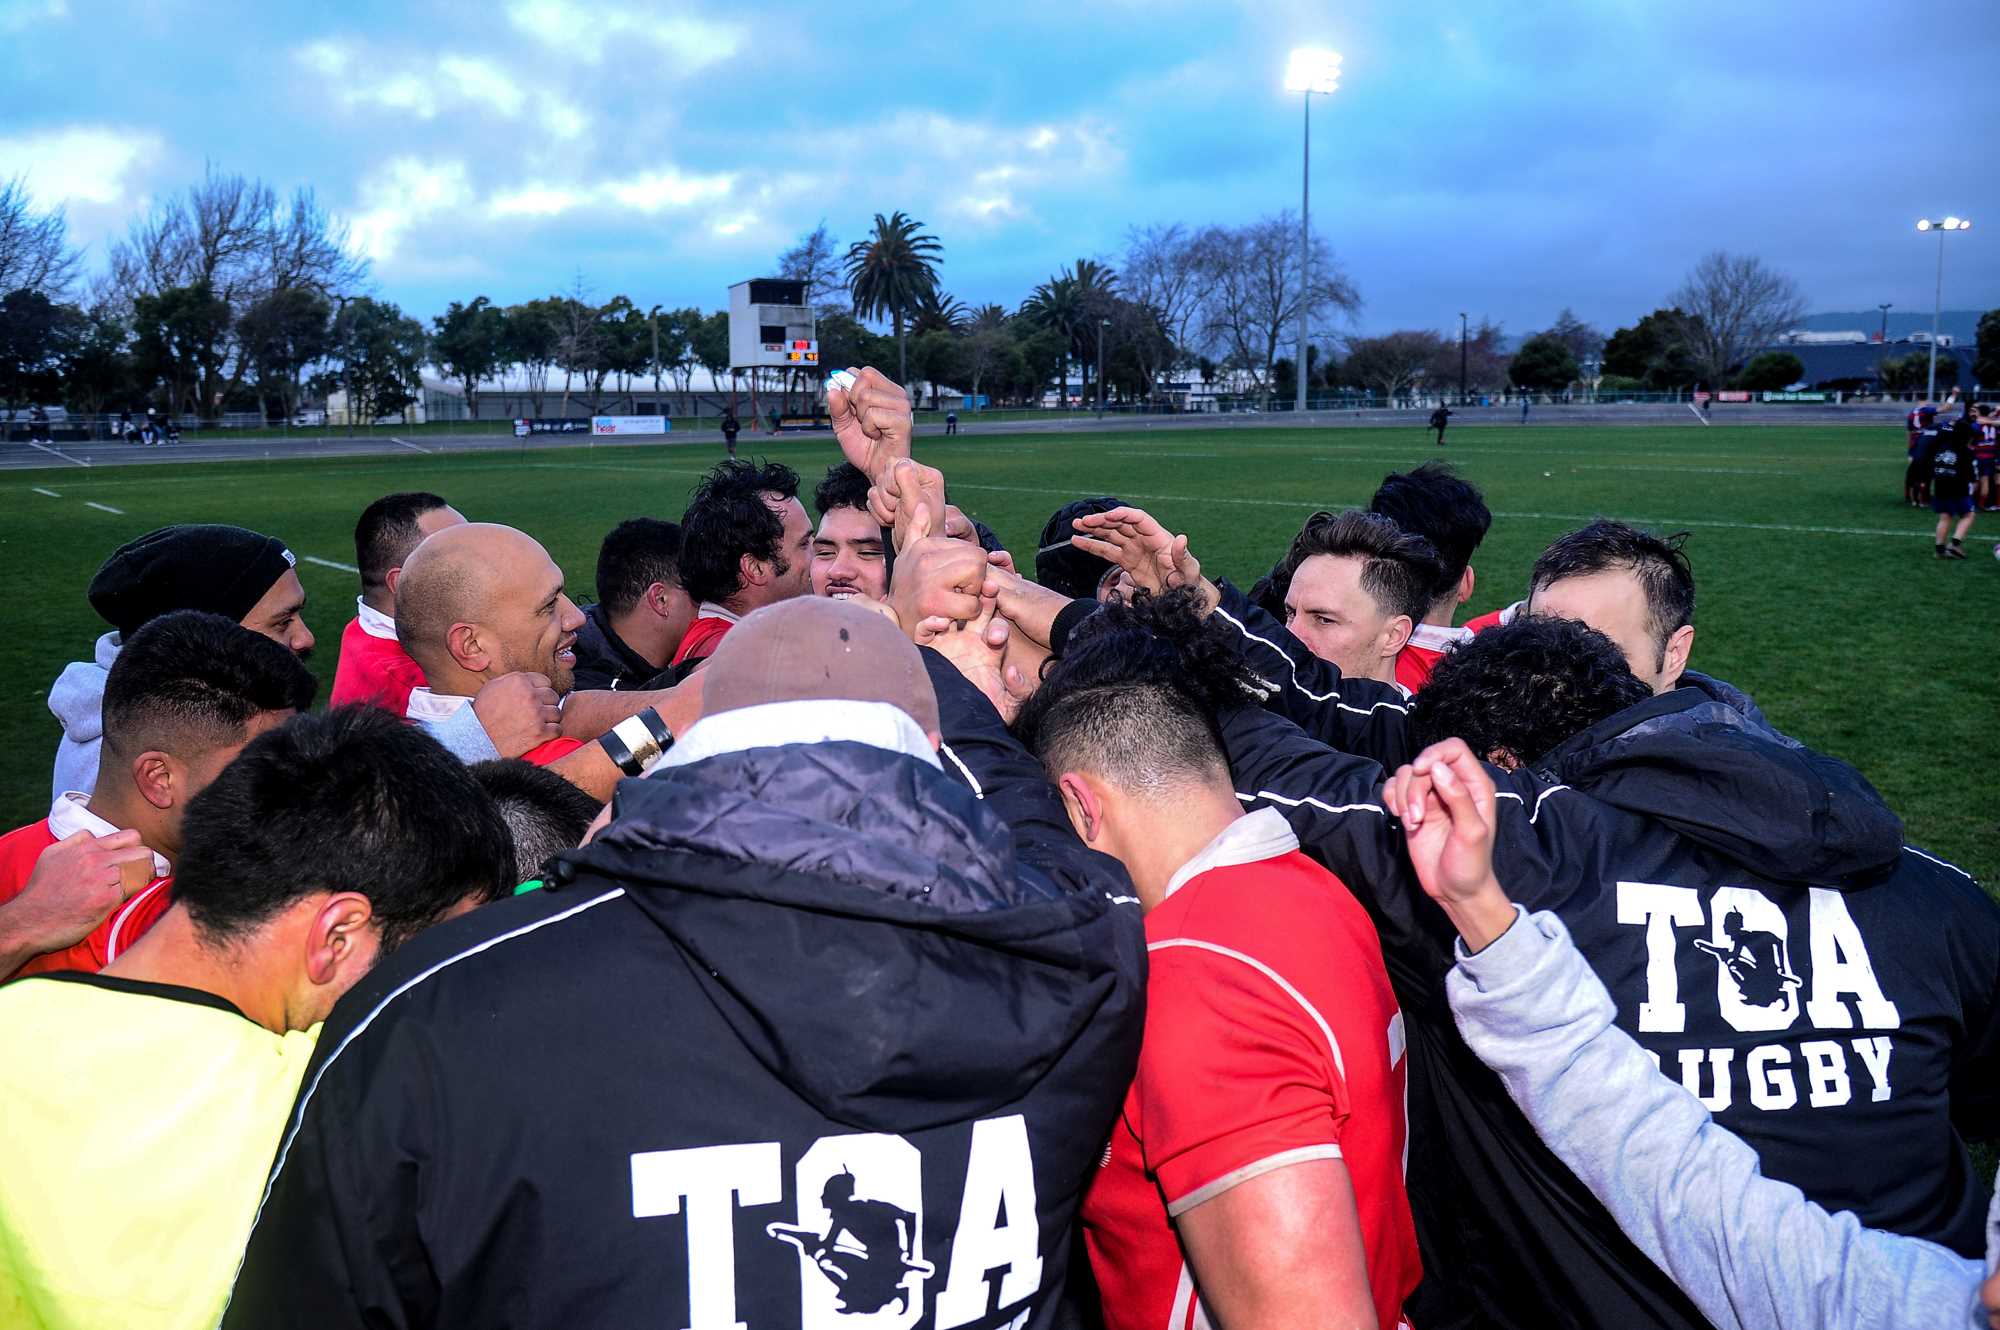 Action from the Horowhenua-Kapiti premier club rugby union final between Toa and Rahui at Levin Domain in Levin, New Zealand on Saturday, 28 July 2018. Photo: Dave Lintott / lintottphoto.co.nz